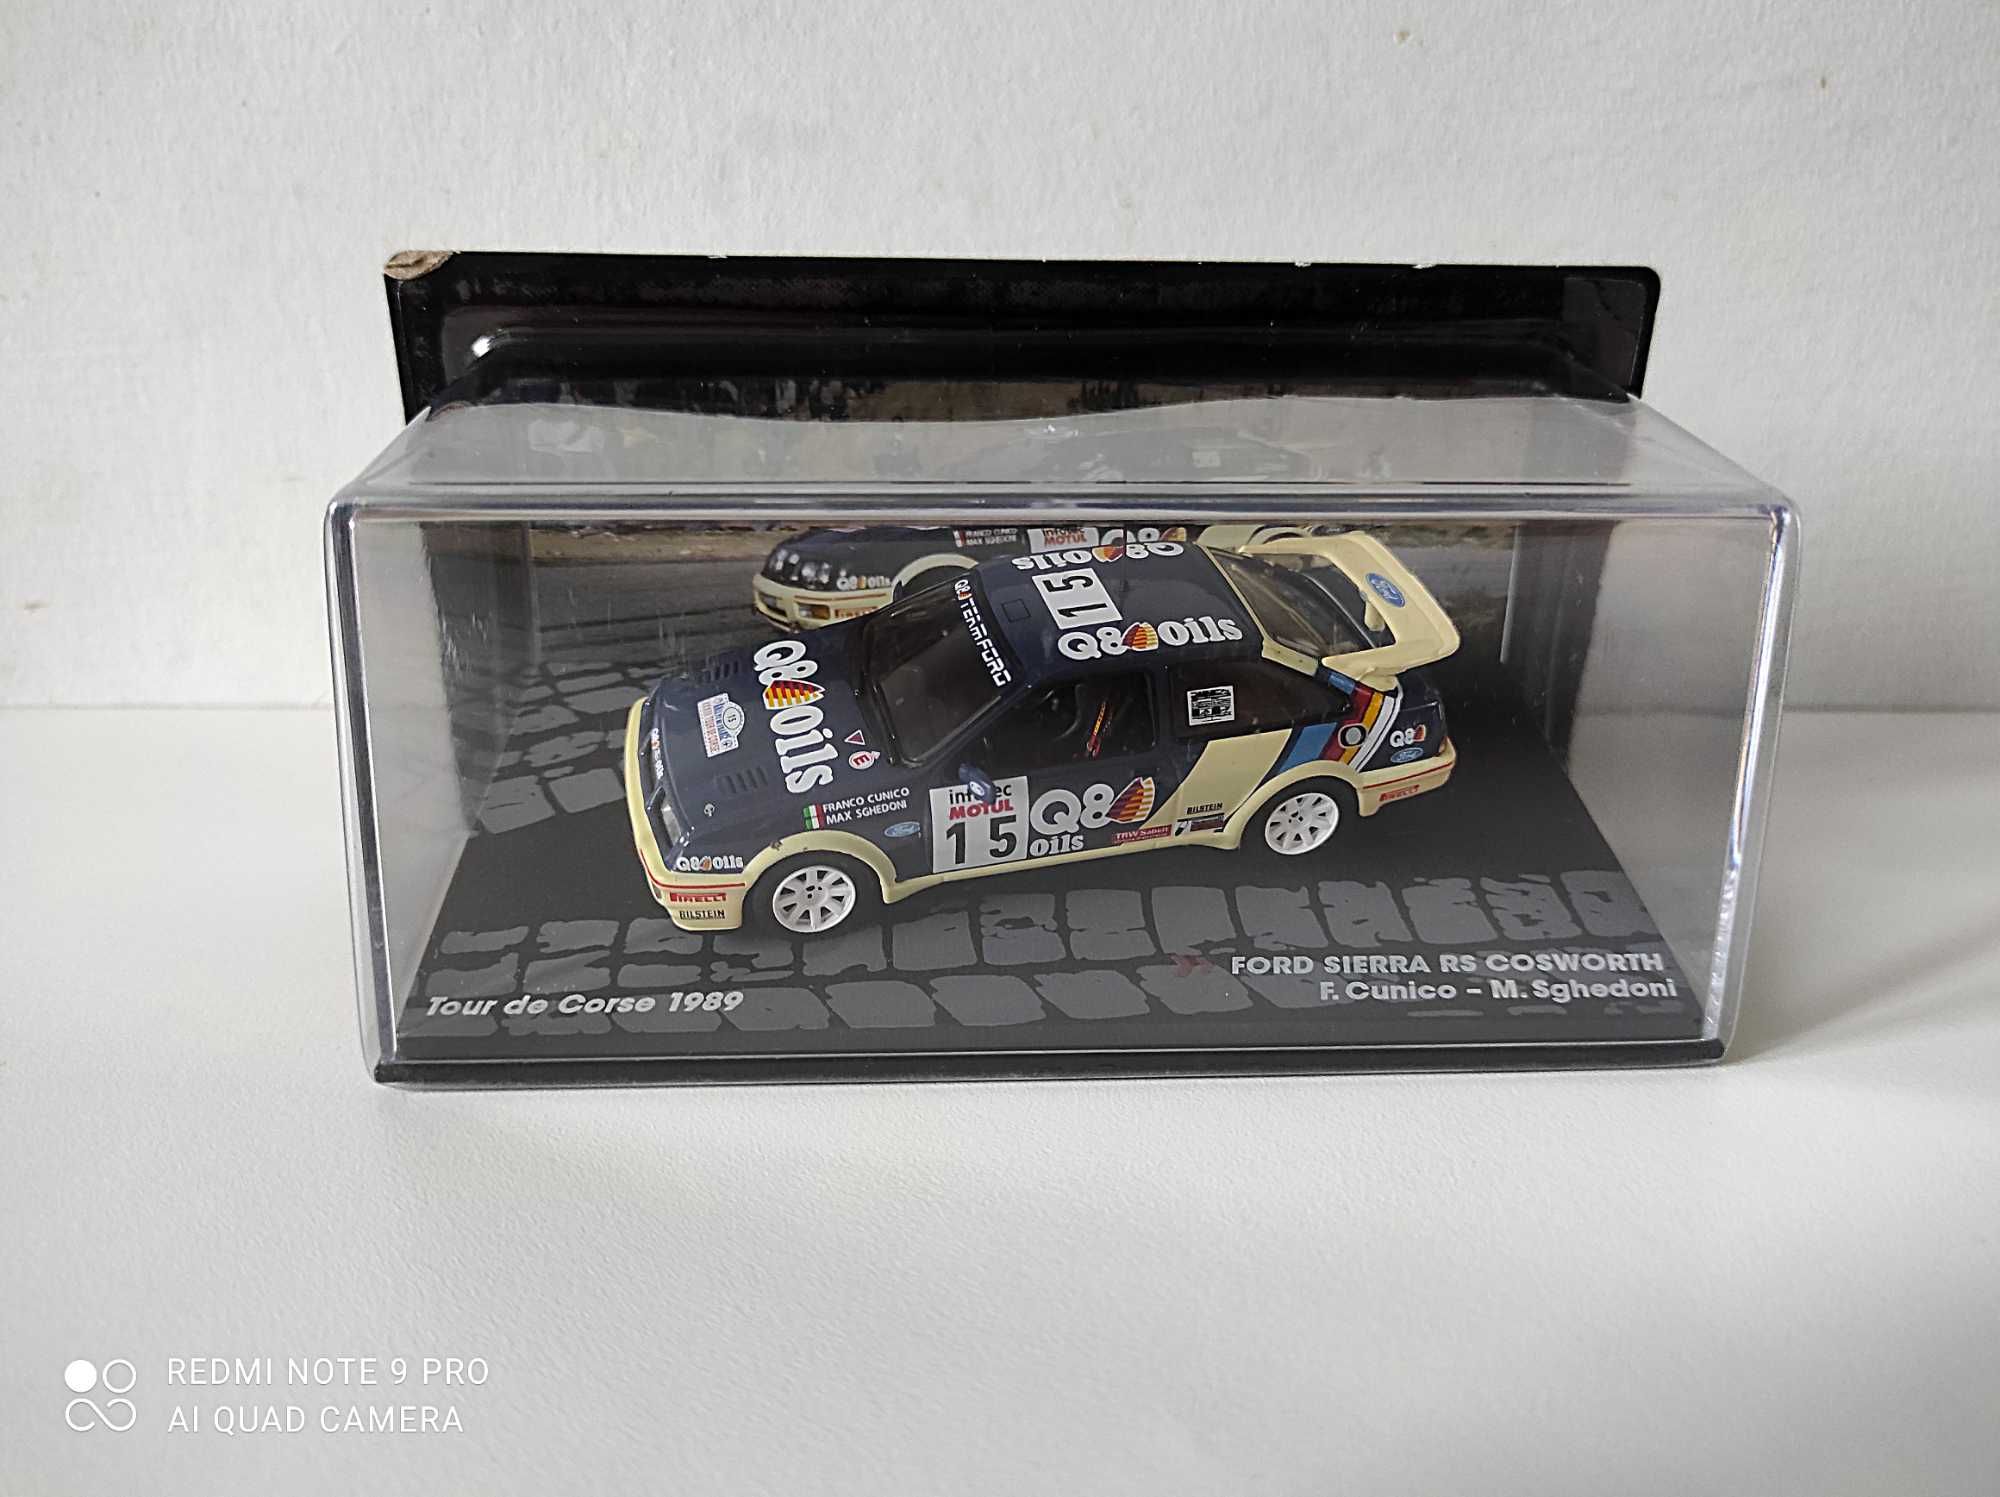 Ford Sierra RS Cosworth Rally Tour de Corse 1989 F.Cunico 1:43